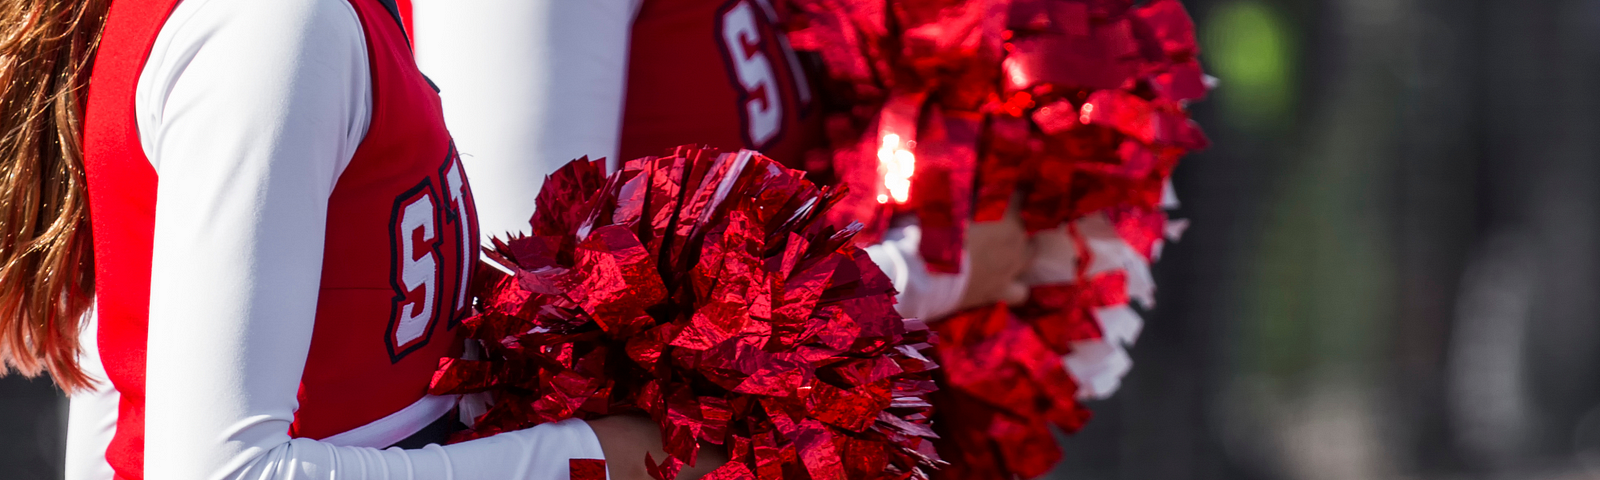 Close up photo of two cheerleaders dressed in red holding red and white pom-poms.